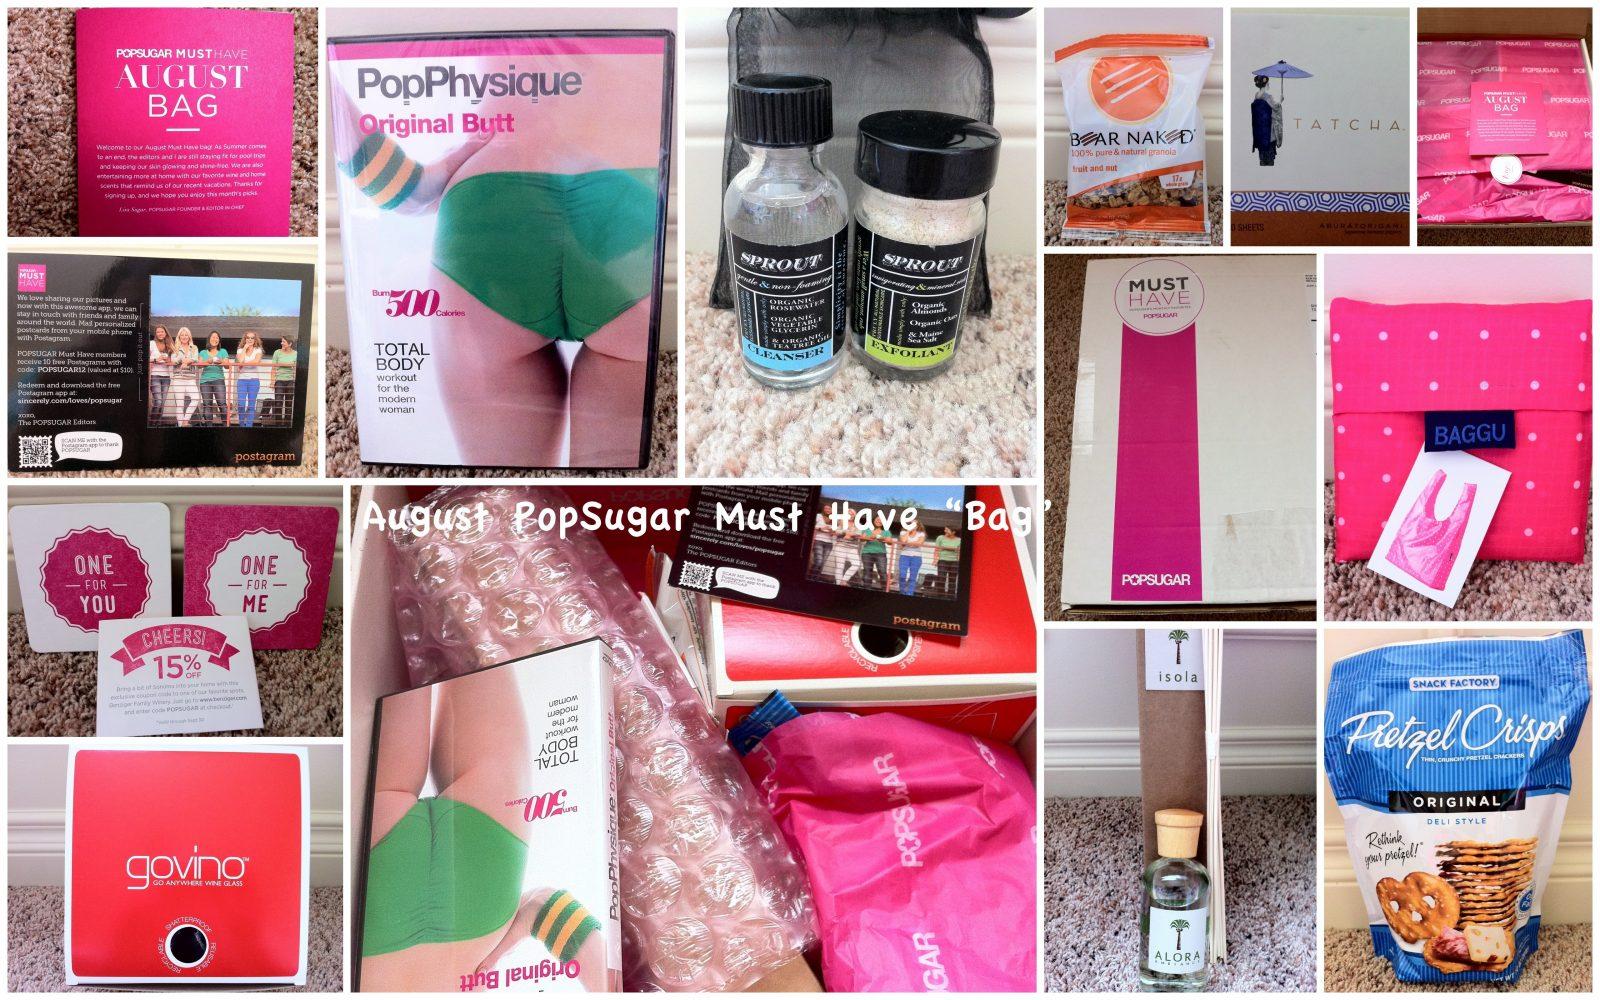 POPSUGAR Must Have Box Review + Coupon Code – August 2012